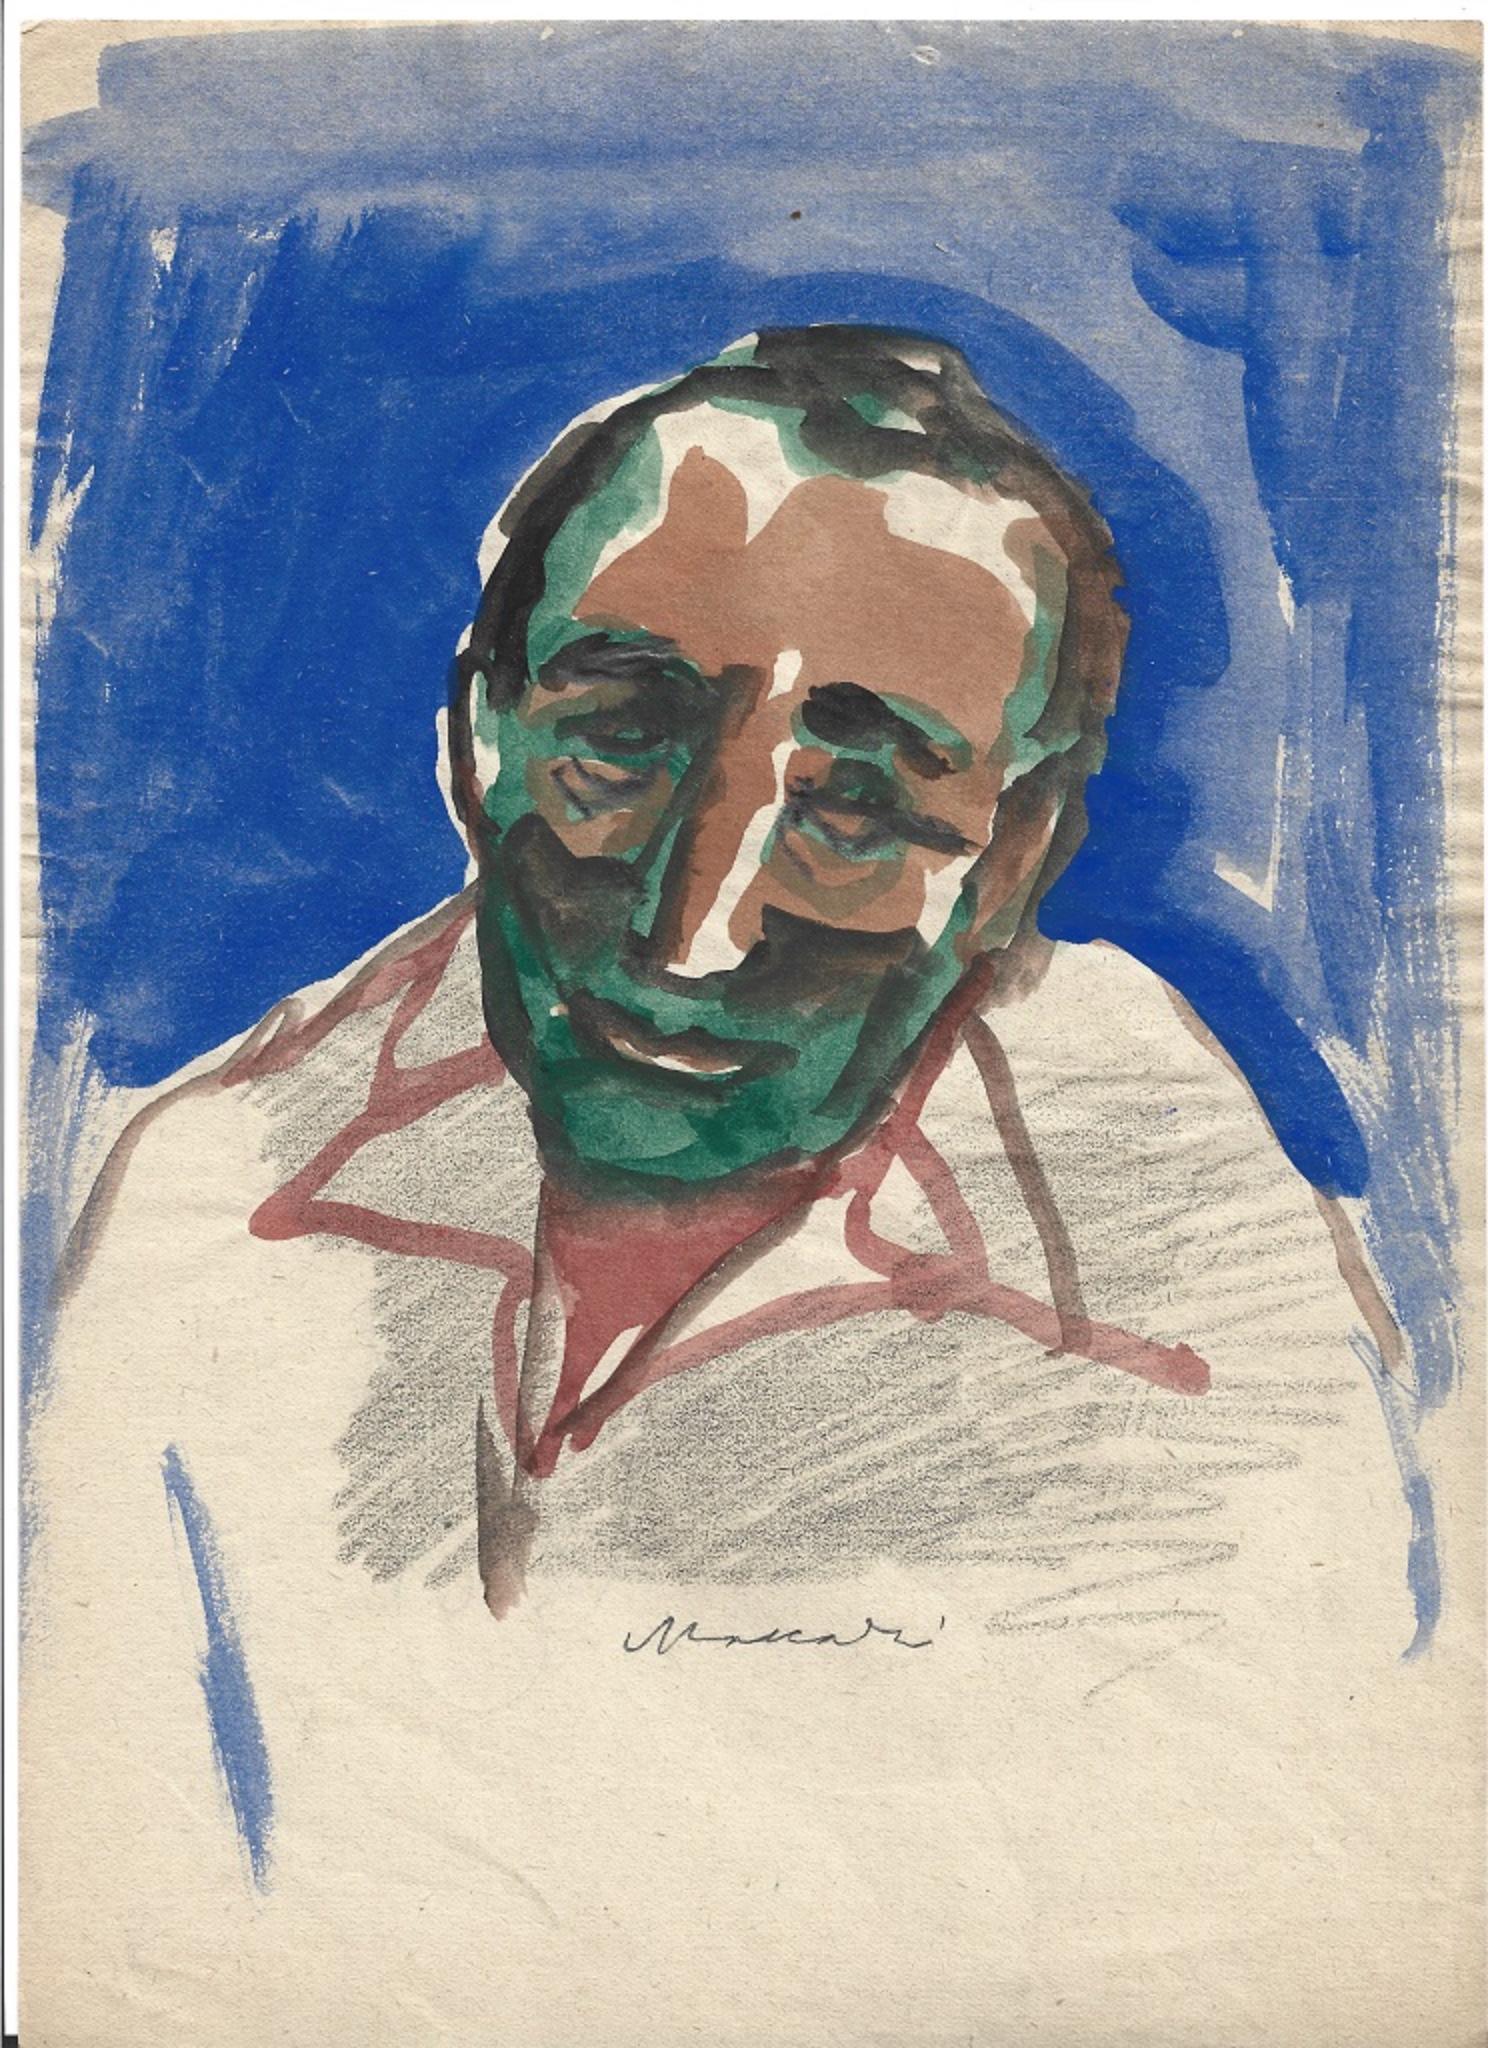 Portrait in colors is an original mixed media drawing on paper, realized around the Seventies by the great Italian artist and journalist, Mino Maccari (Siena, 1898 - 1989).

Mixed media (charcoal, tempera, watercolor) drawing on ivory-colored and